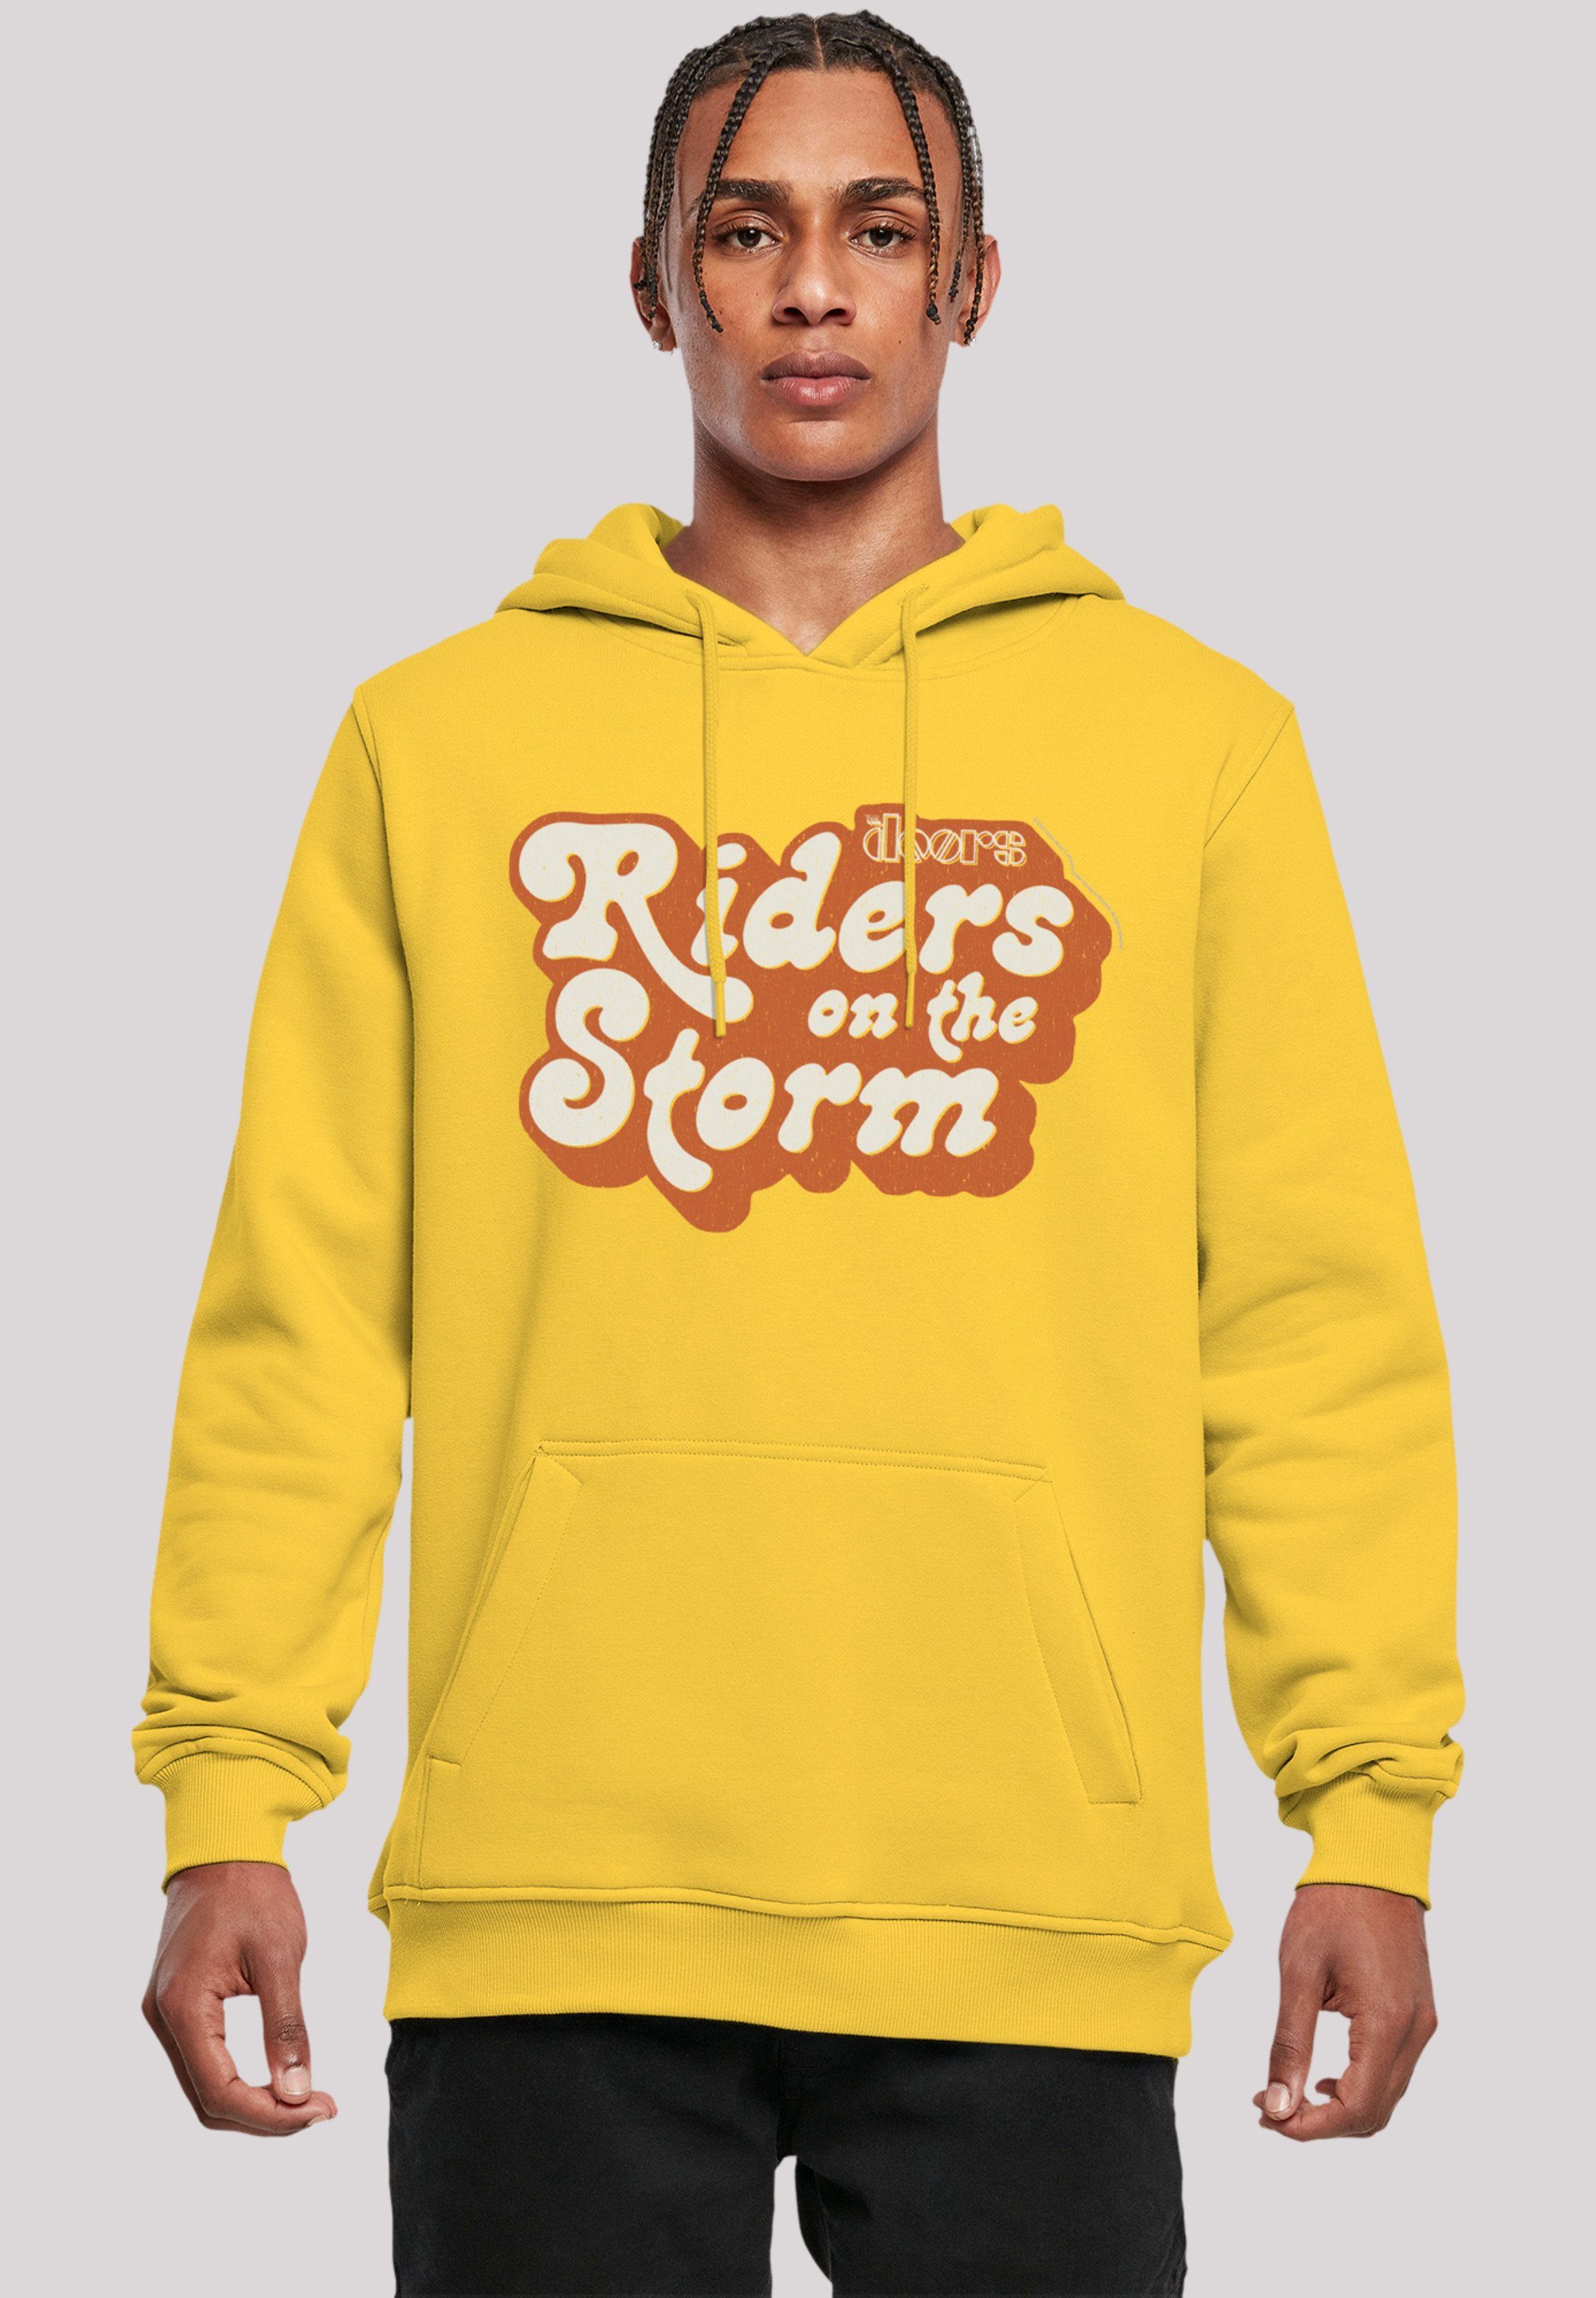 F4NT4STIC Hoodie The Doors Music Band Riders on the Storm Logo Premium Qualität, Band, Logo taxi yellow